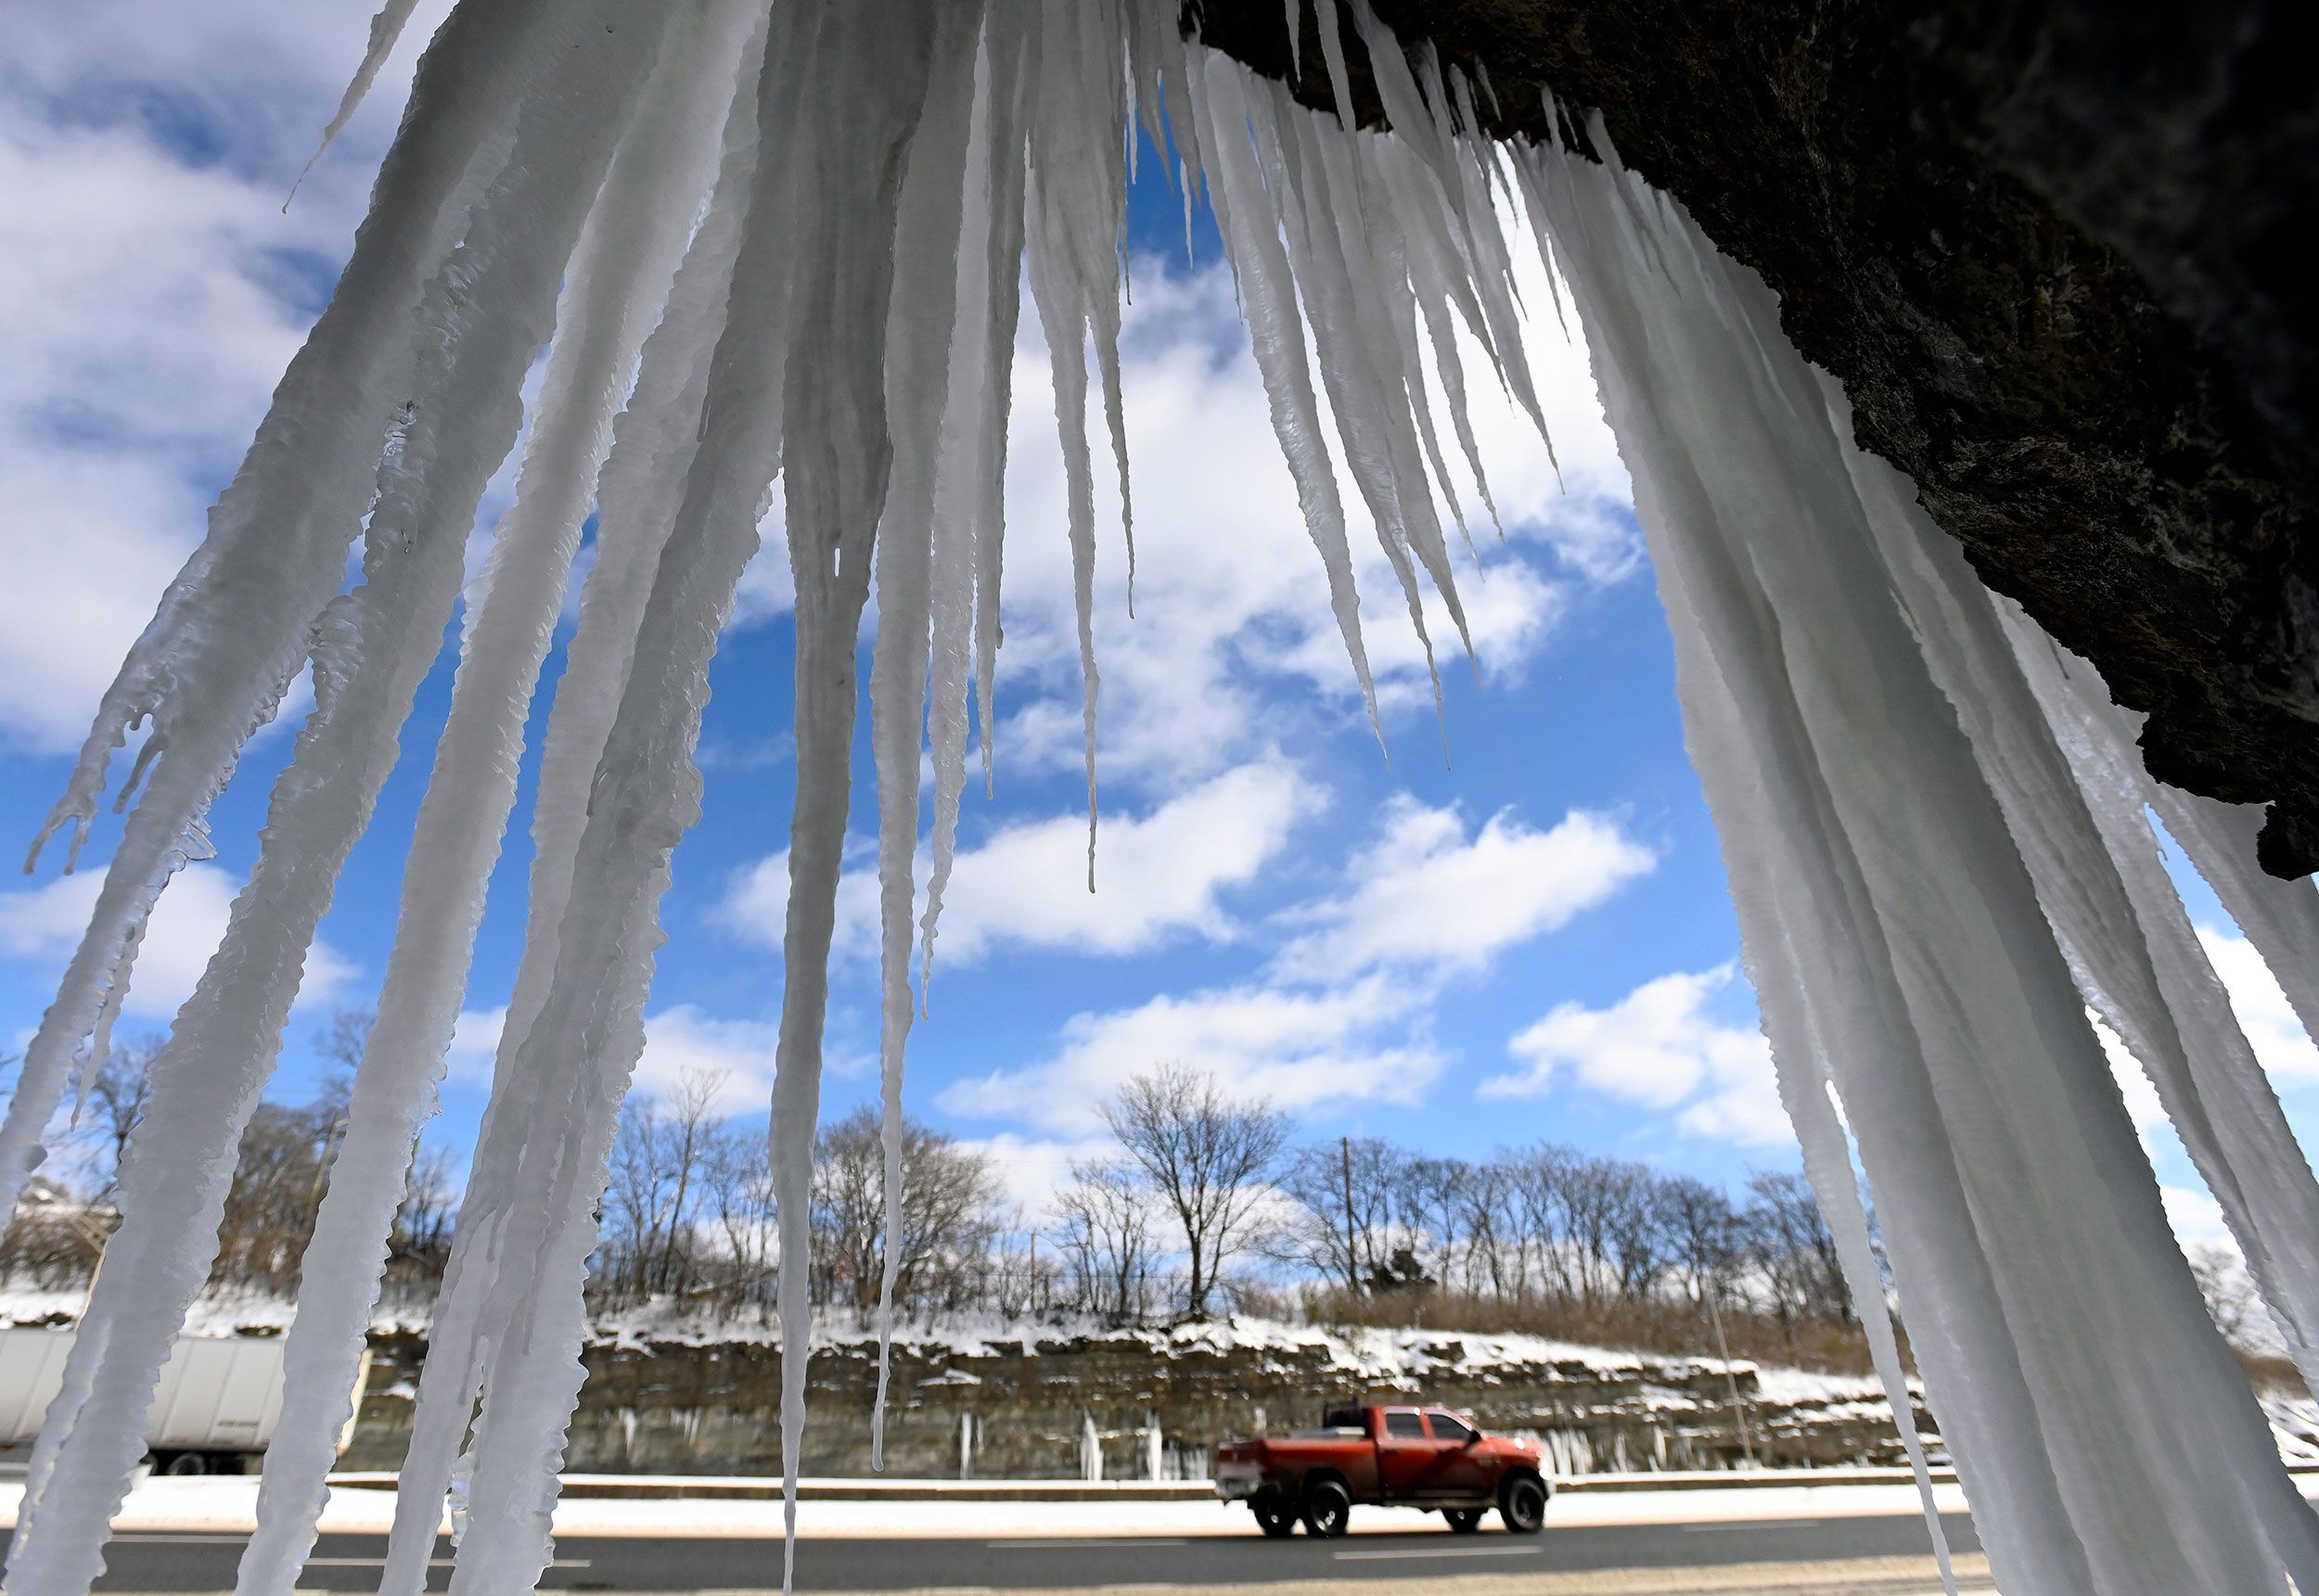 Texas Car Wash Freezes In Cold Weather, Looks Like Icy, Arctic Cave